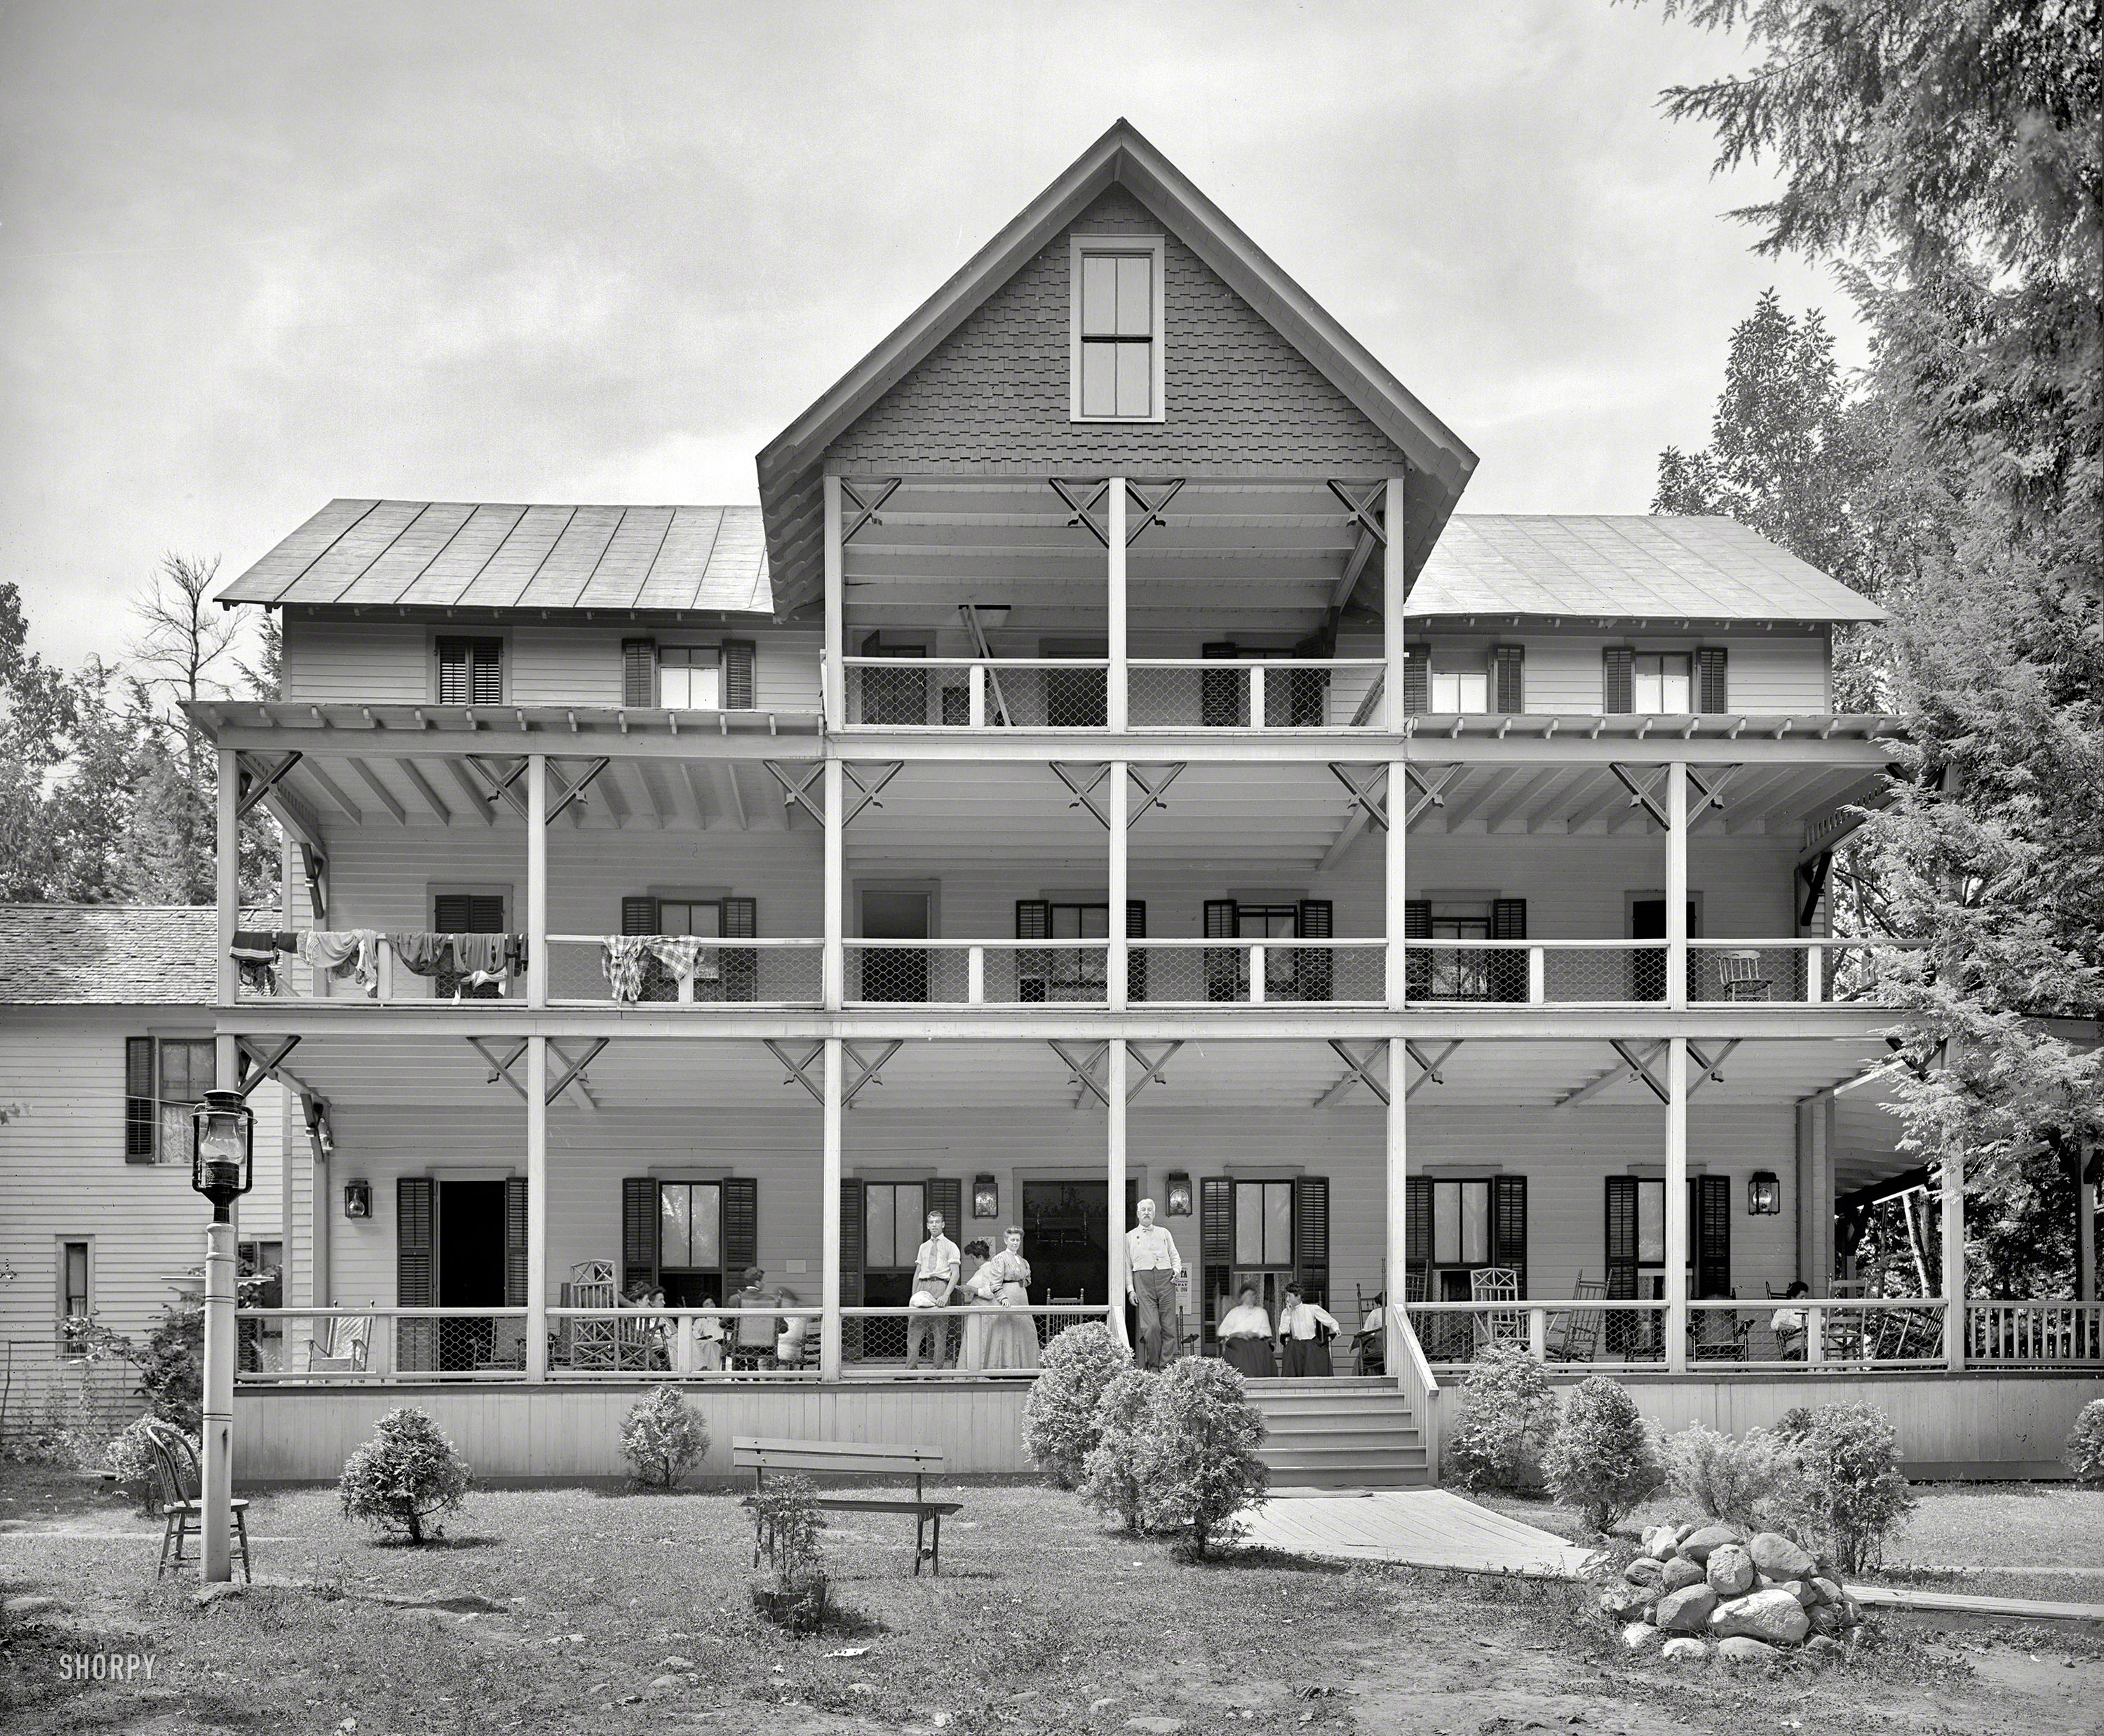 1906. Lake George, New York. "Horicon Lodge, Cleverdale." Come on by and set a spell. 8x10 glass negative, Detroit Publishing Company. View full size.